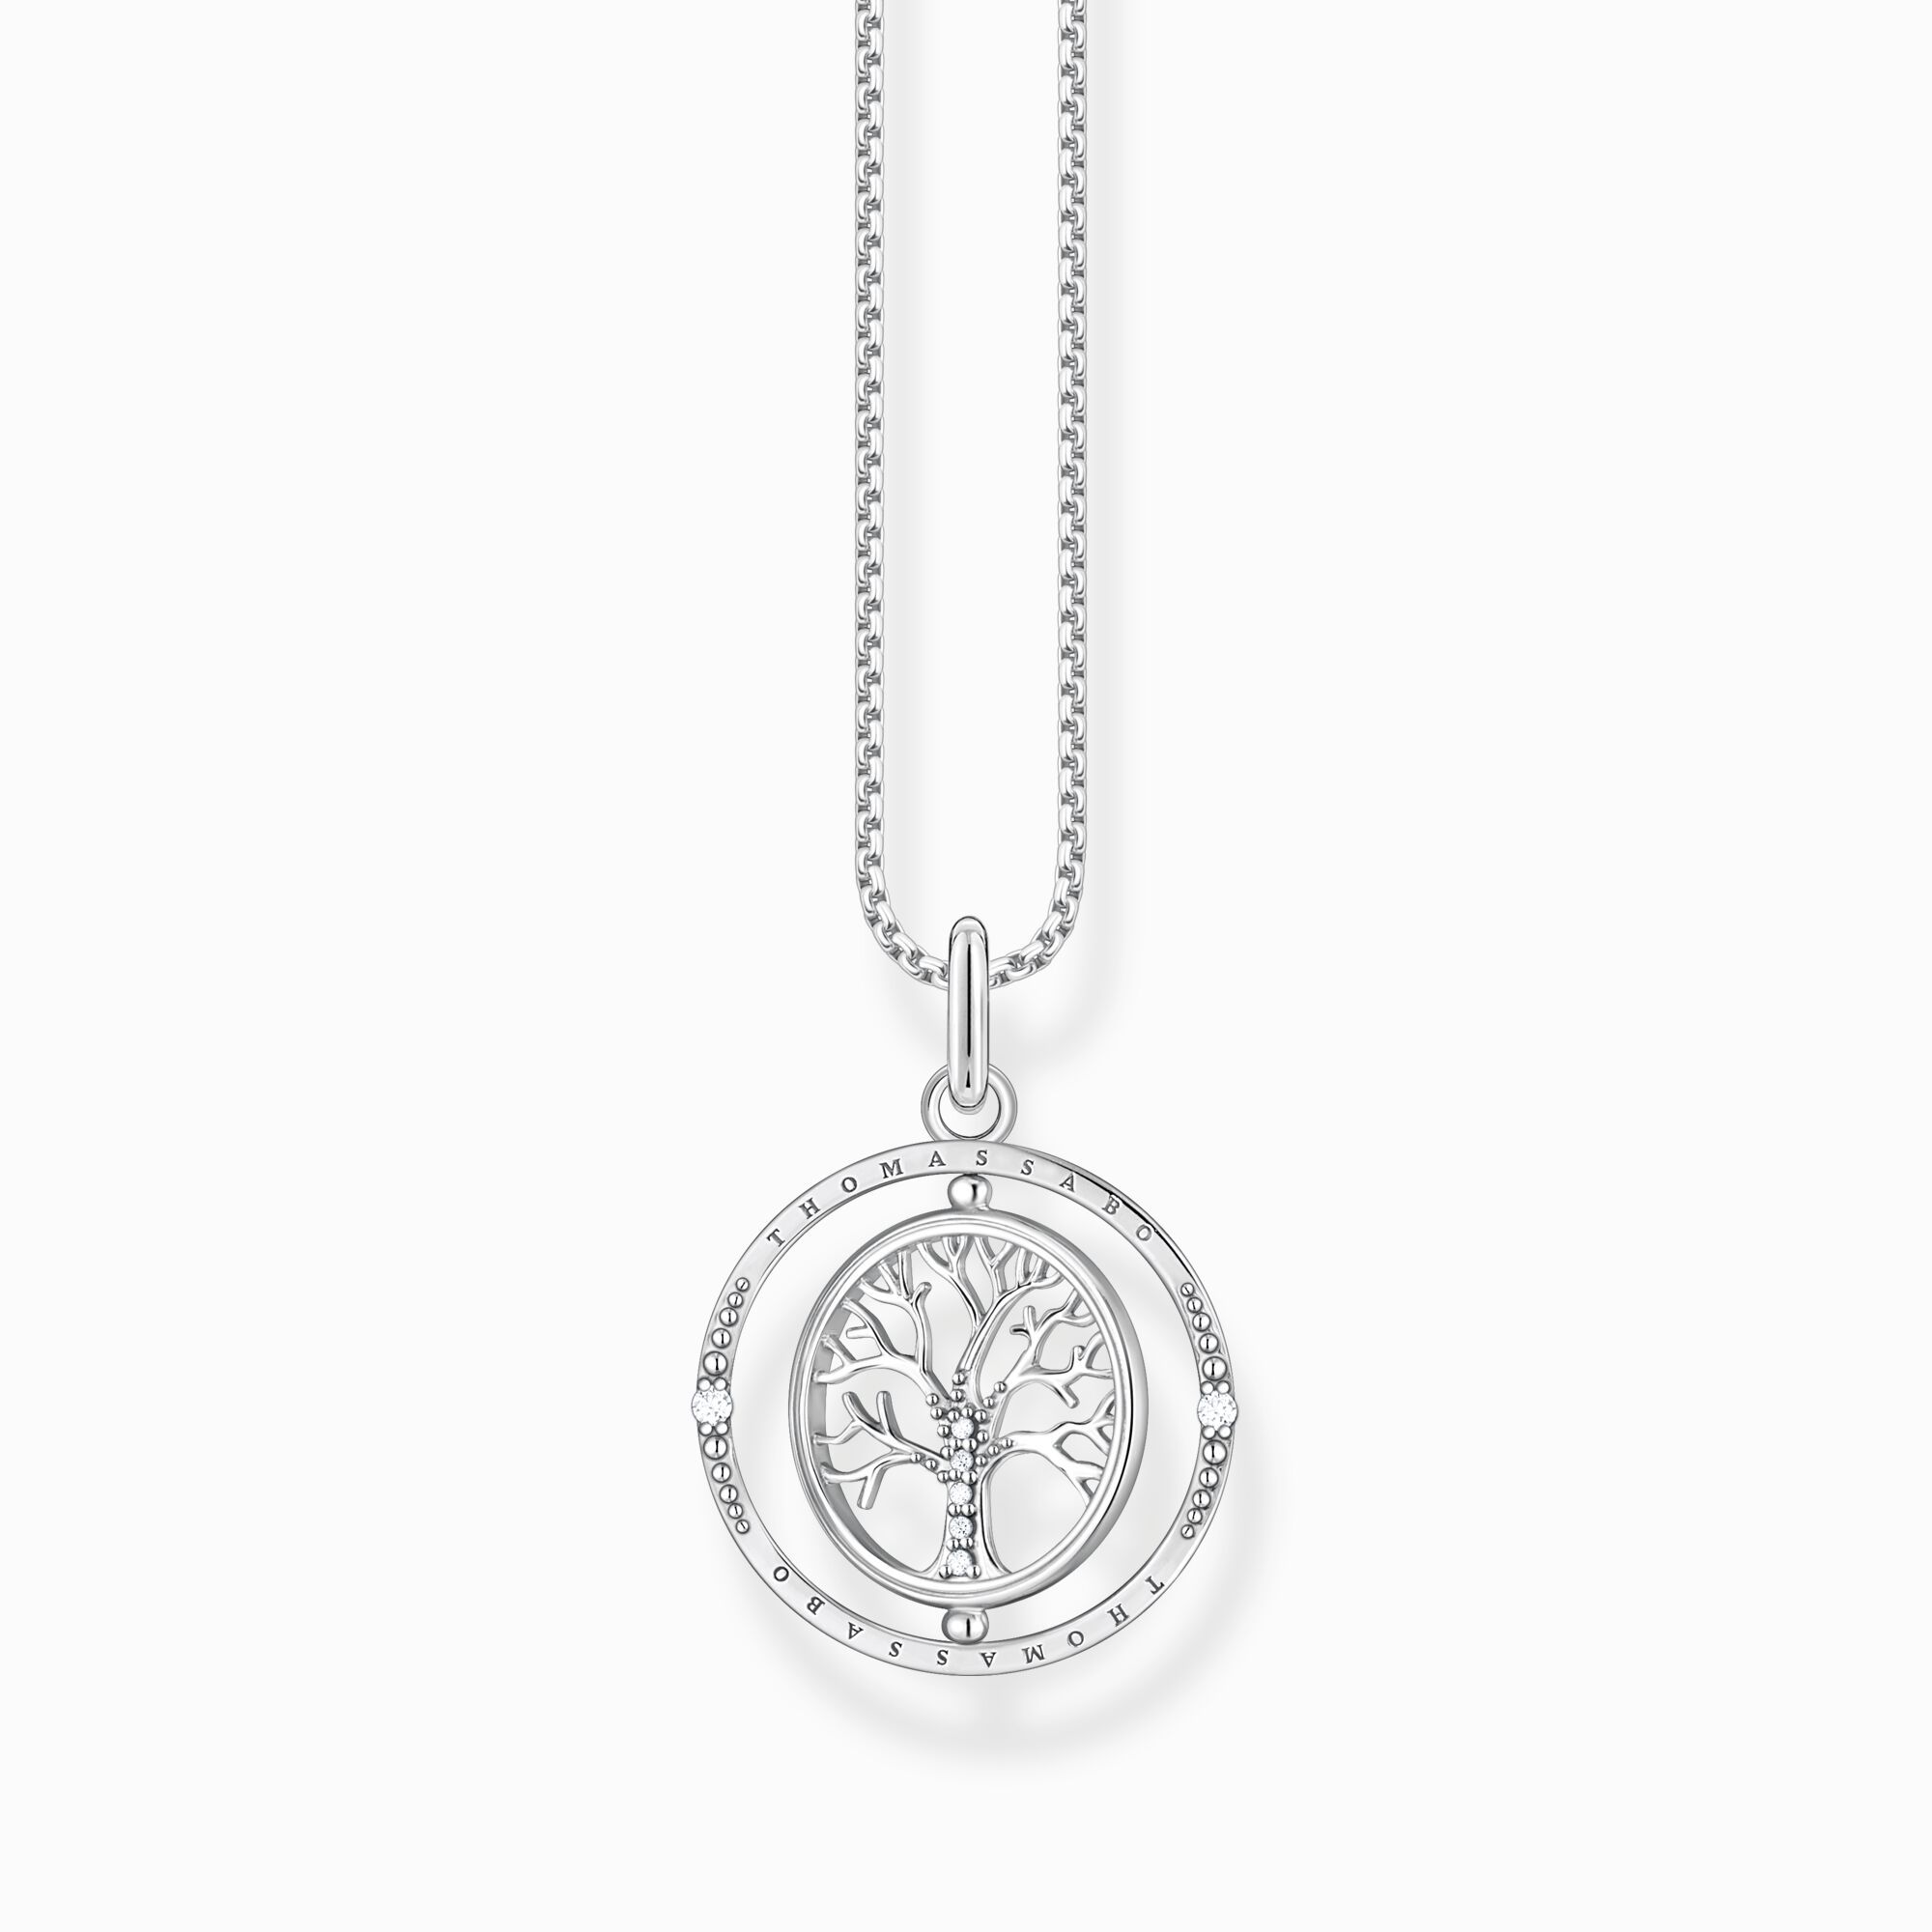 Necklace with – of Love, pendant: silver THOMAS Tree SABO